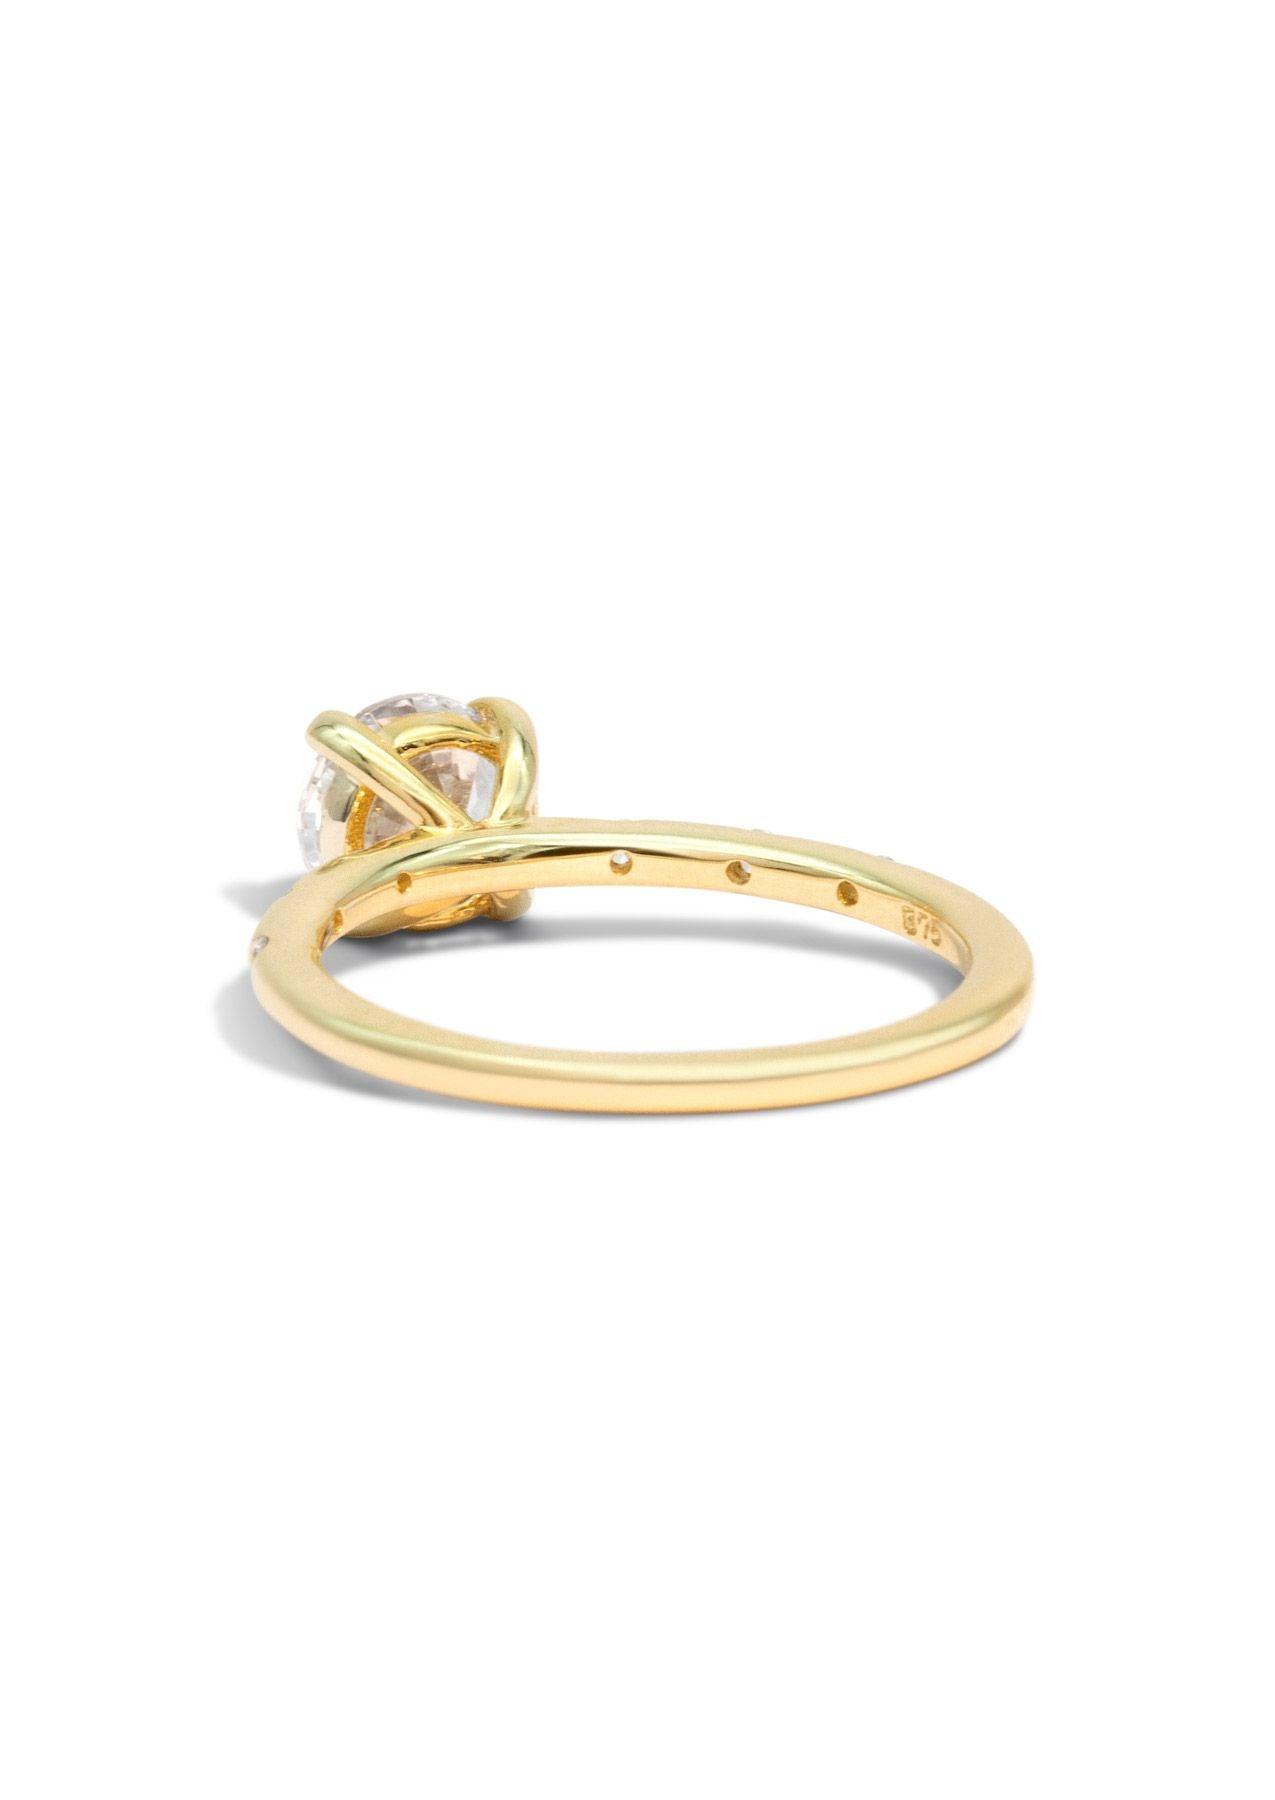 The Constance Yellow Gold Cultured Diamond Ring - Molten Store